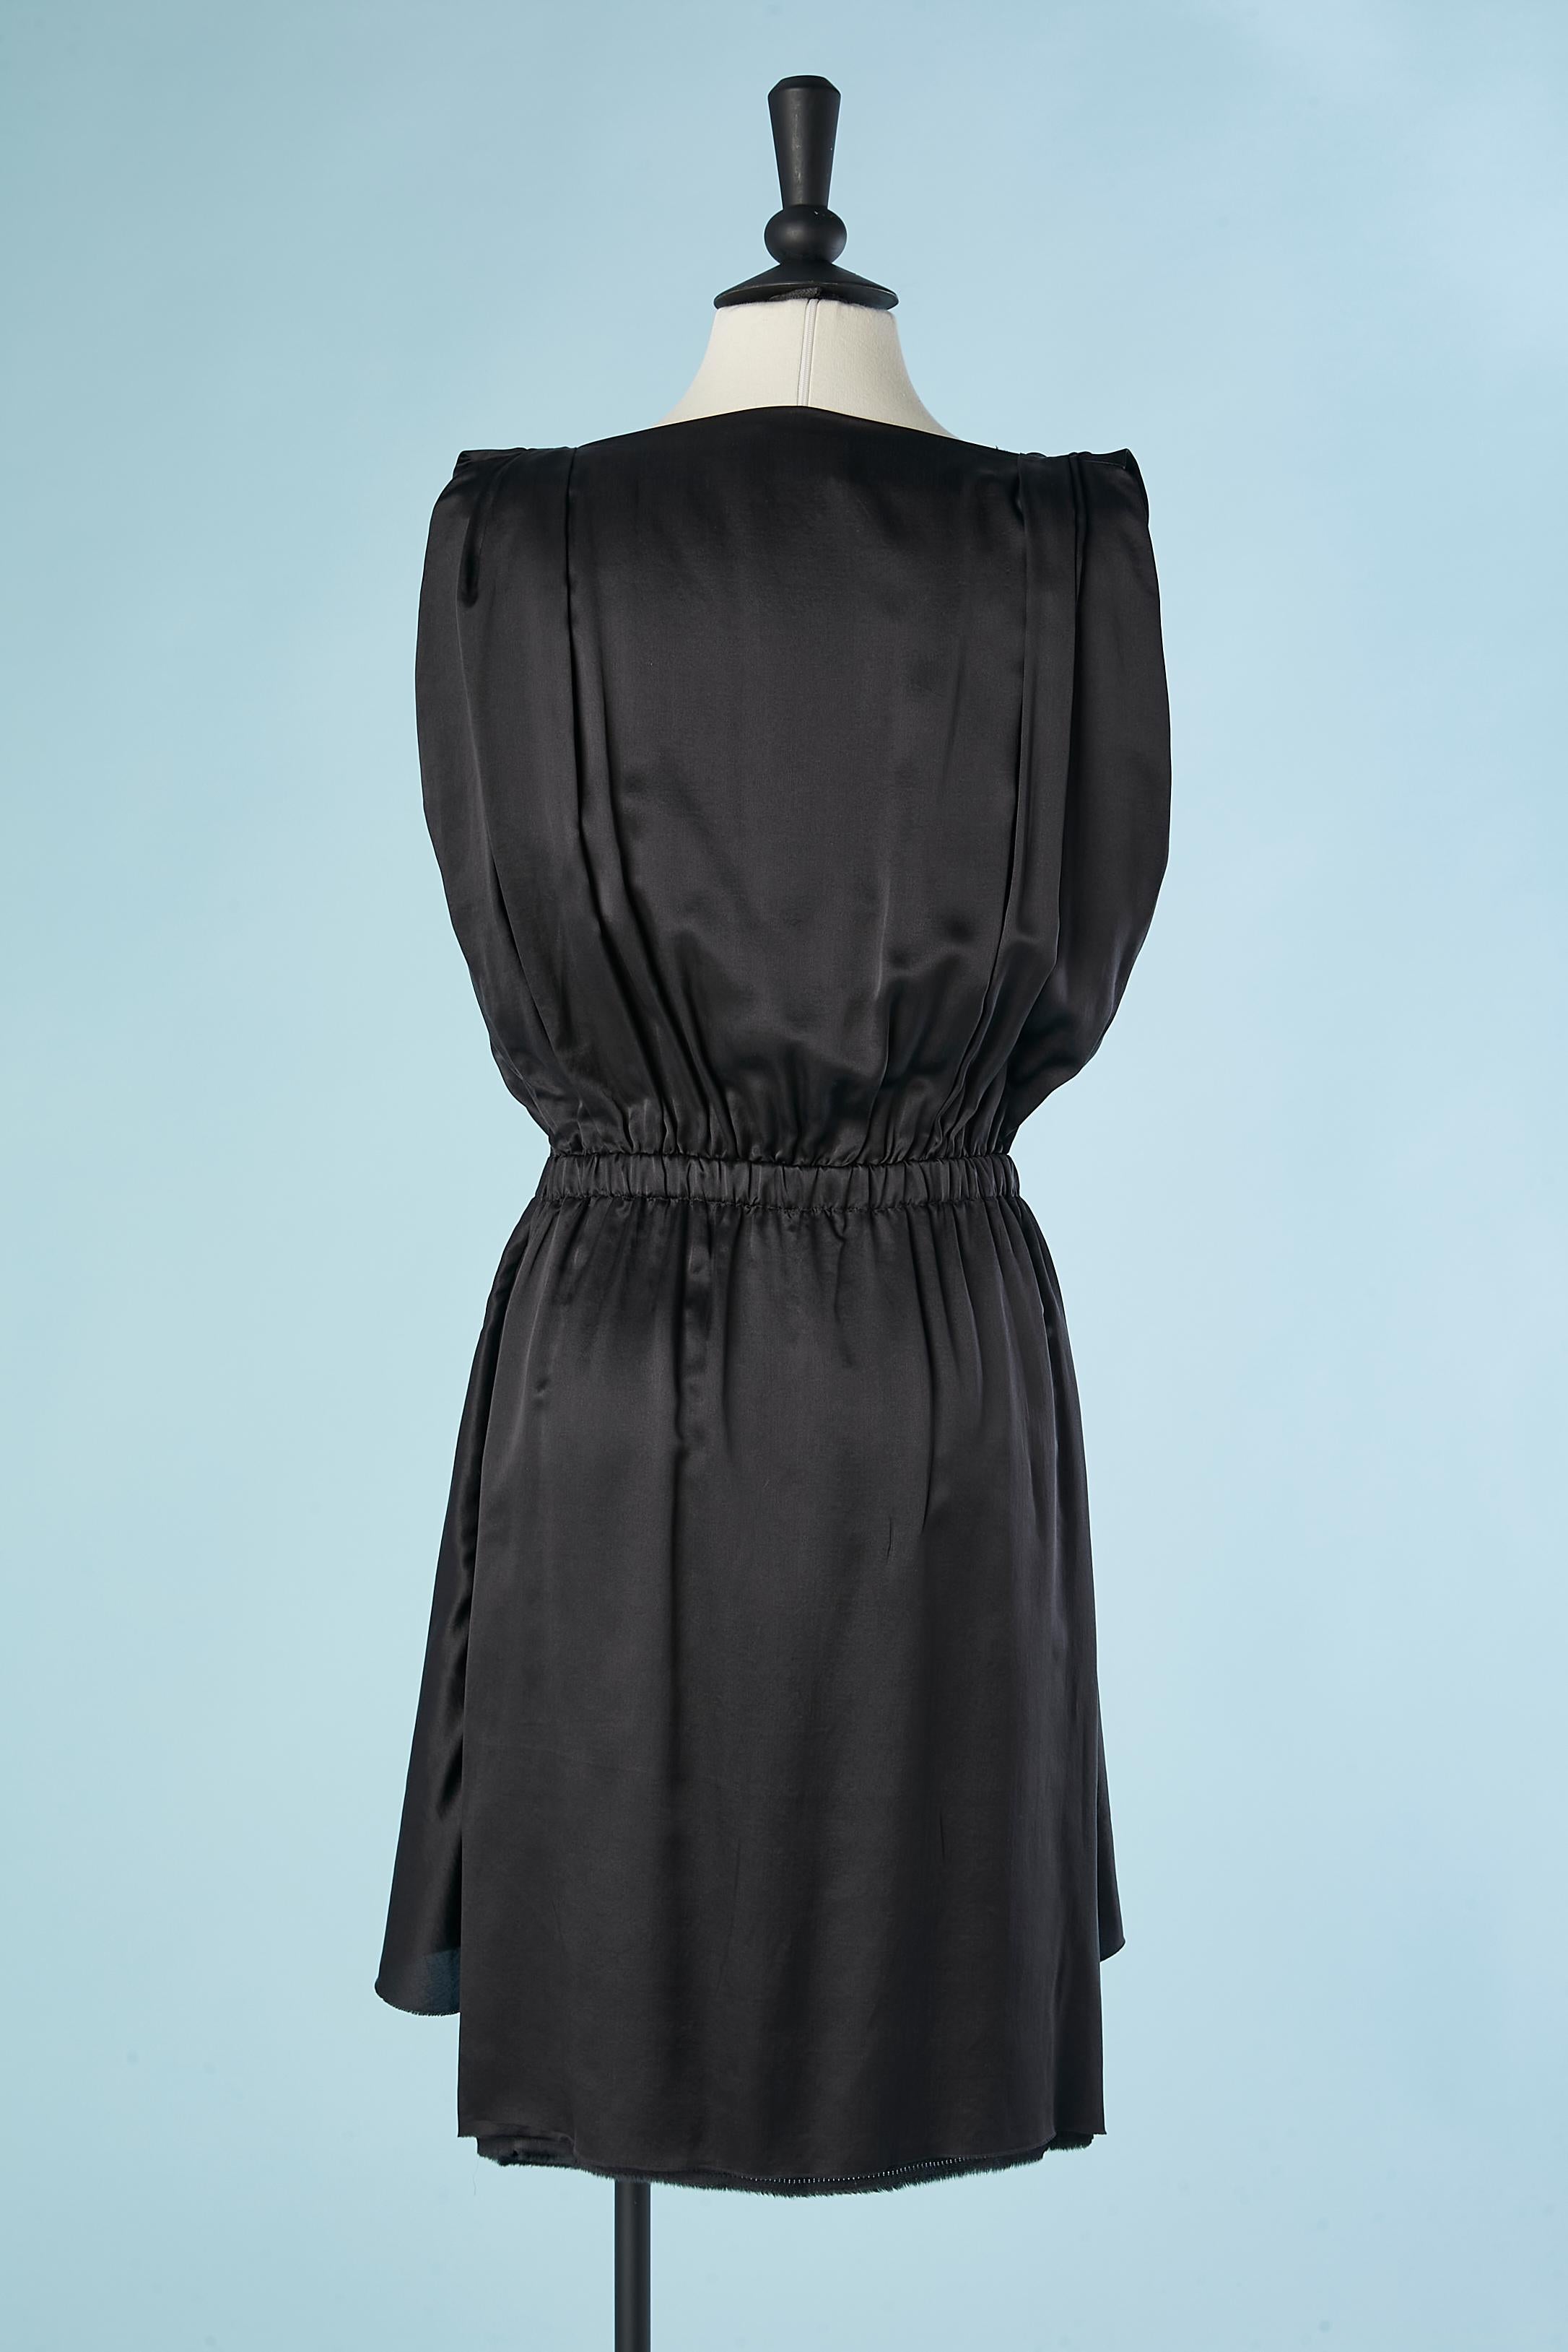 Black silk and rayon cocktail dress Lanvin by Alber Elbaz for Corso Como  For Sale 1